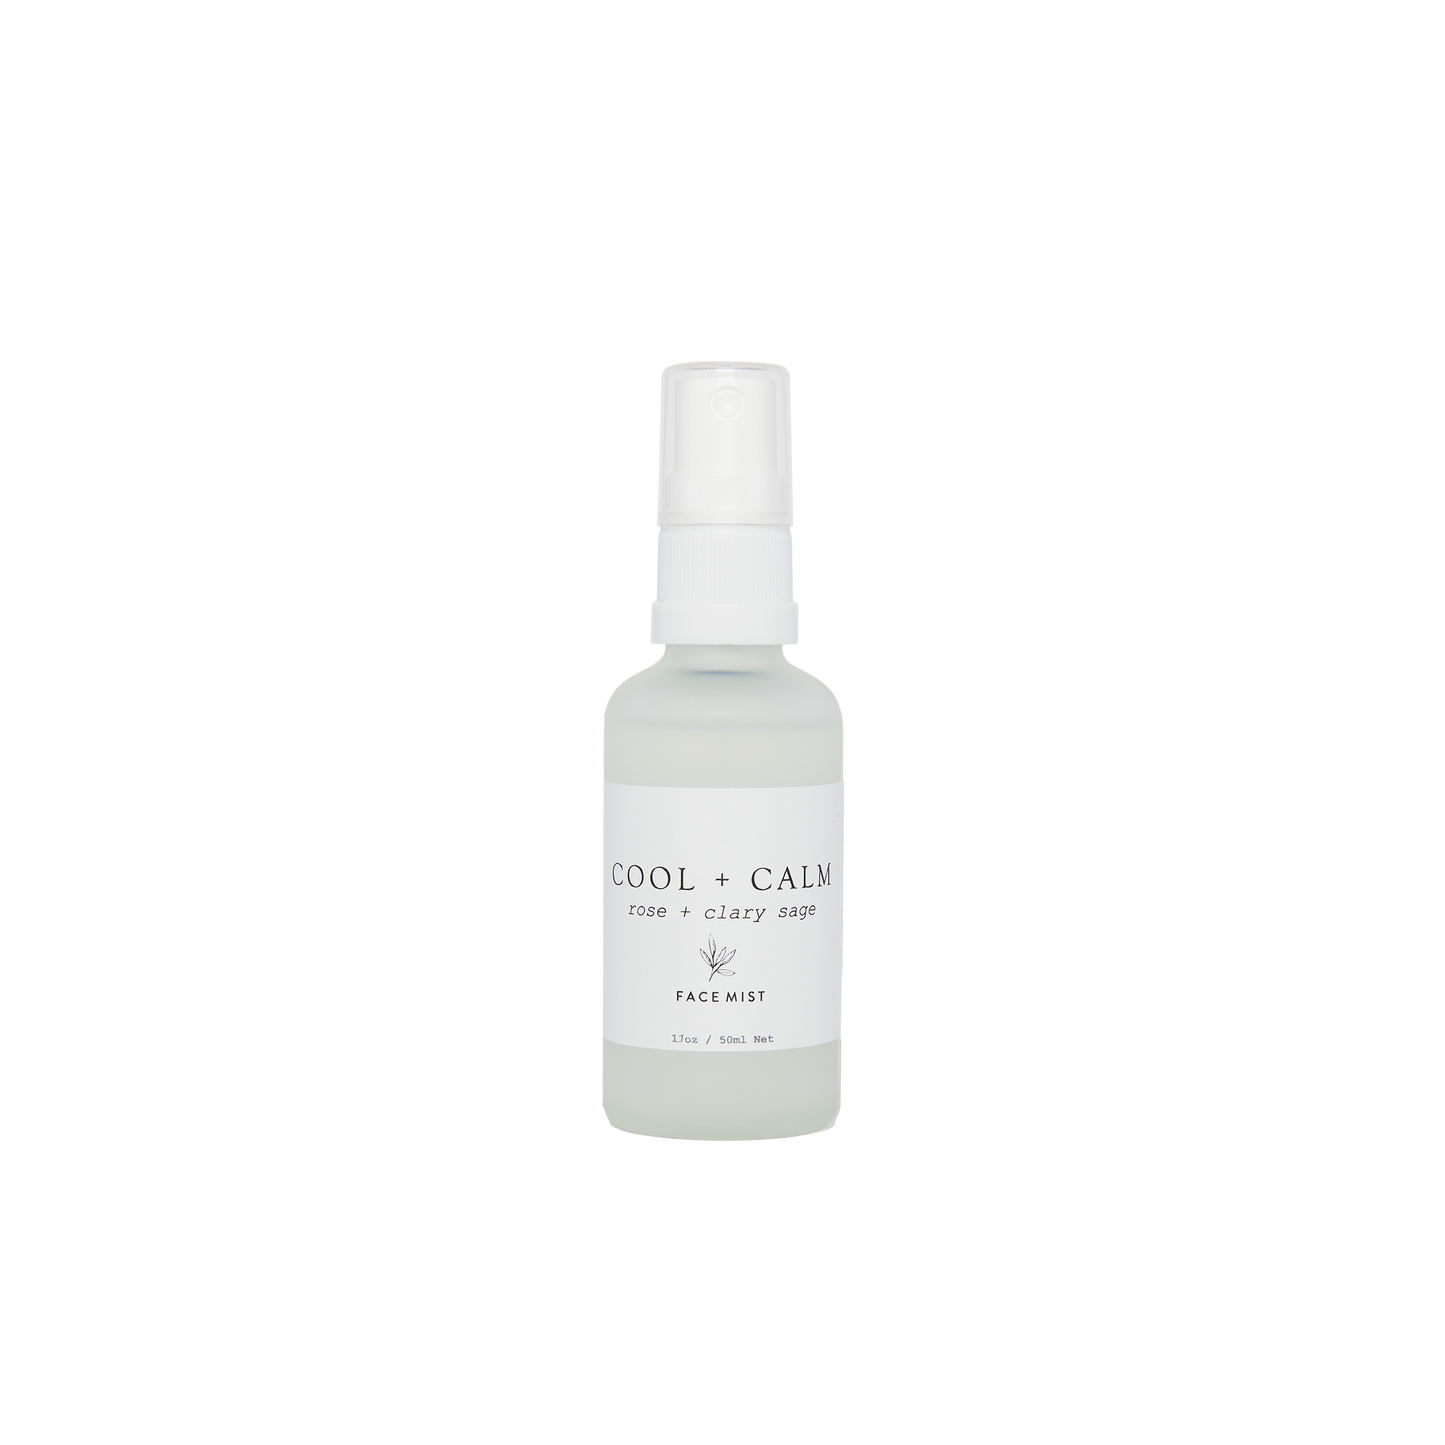 cool and calm rose water based mist for menopausal hot flushes and anxiety. In a frosted clear bottle with a white label and white pump